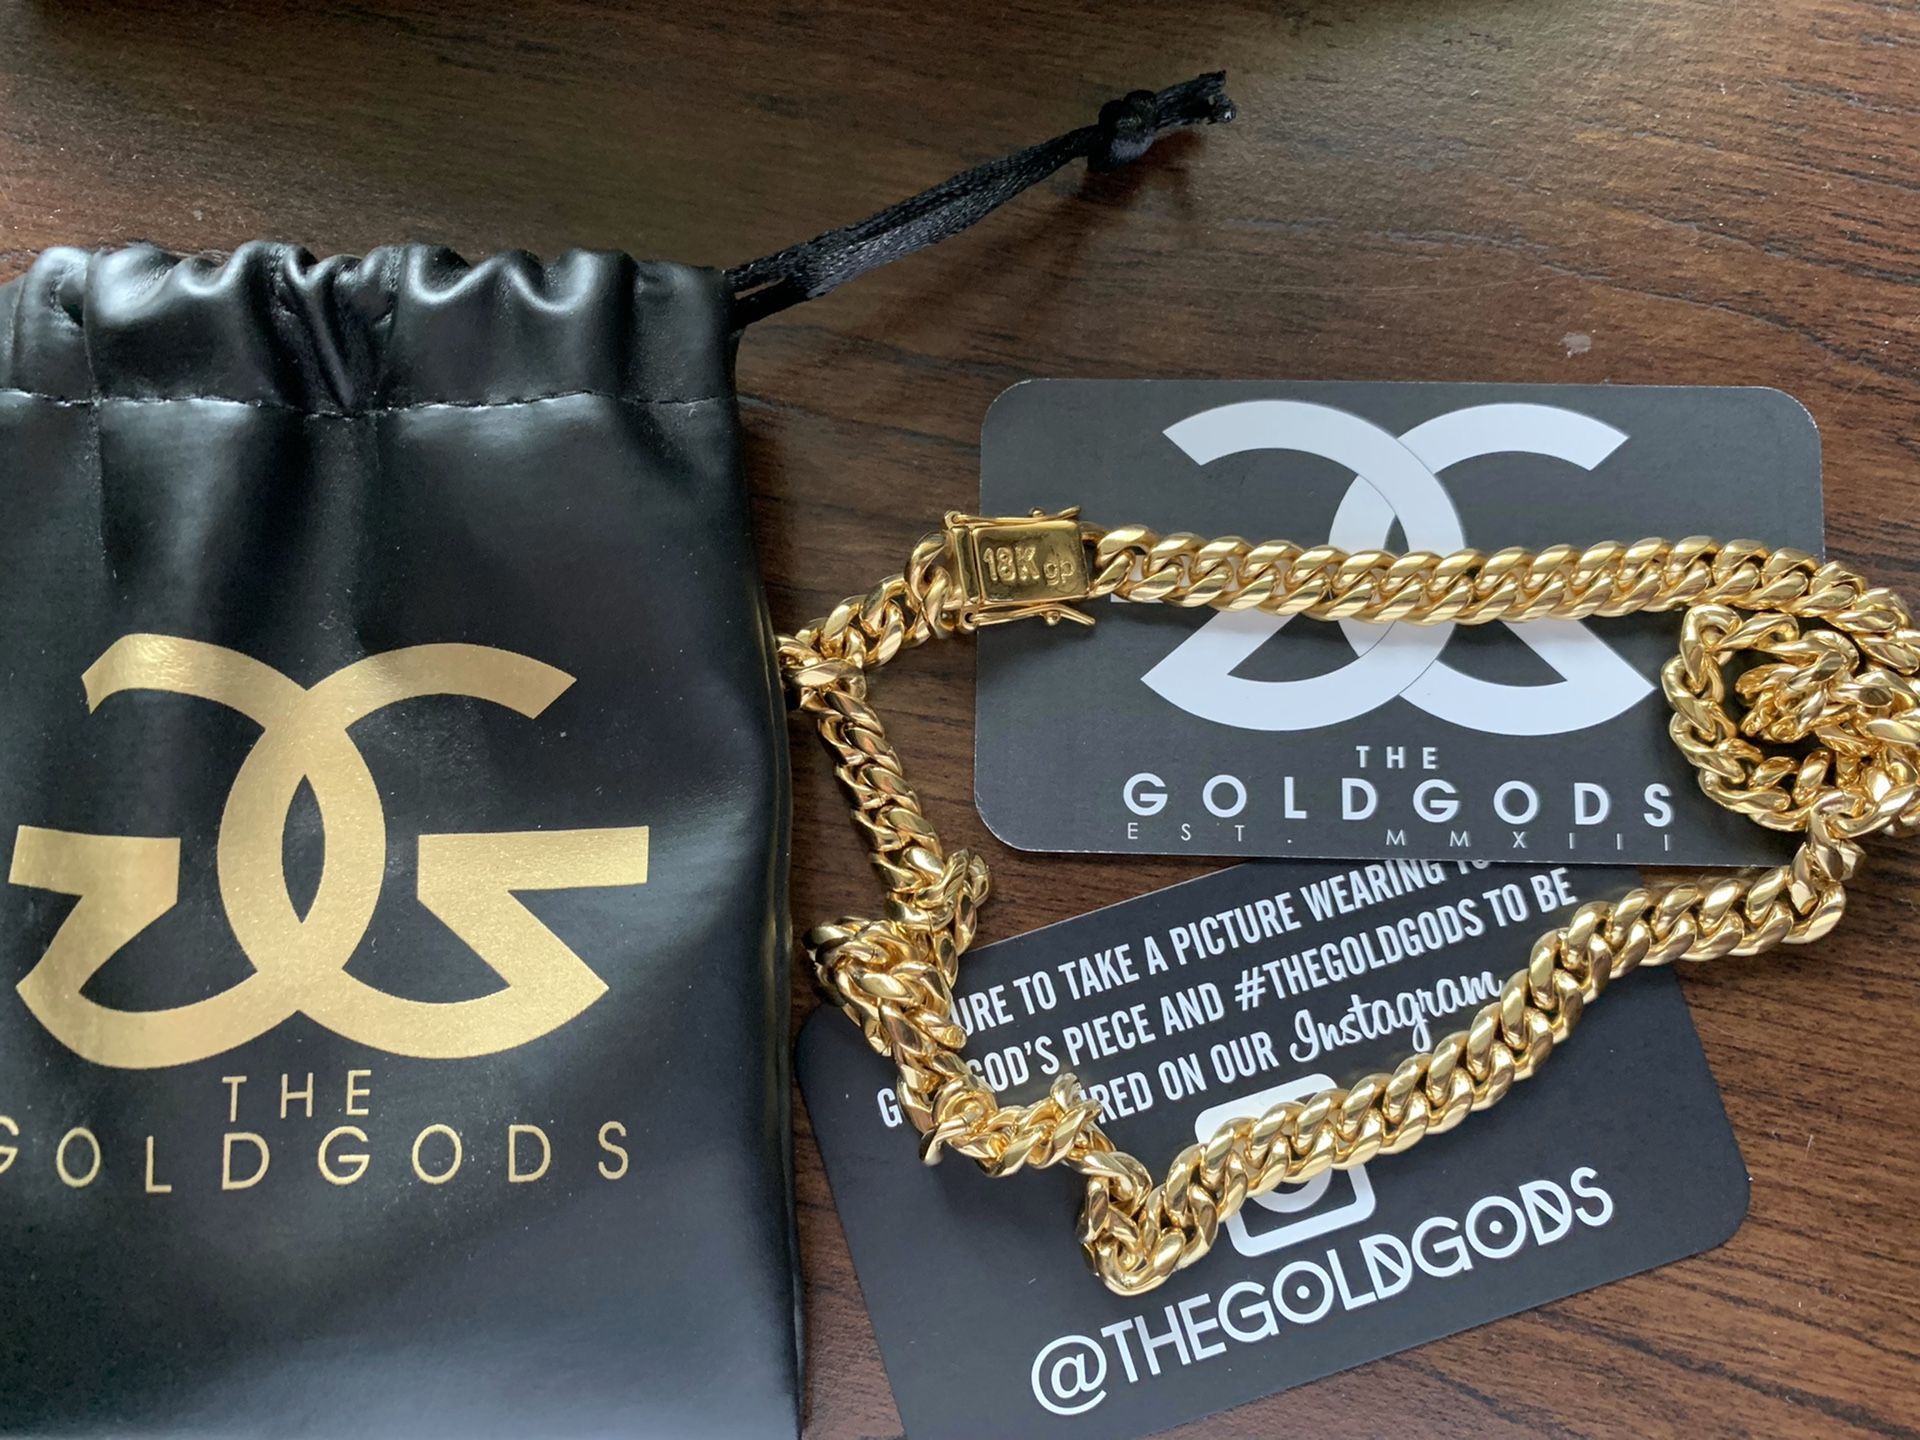 18k gold plated chain